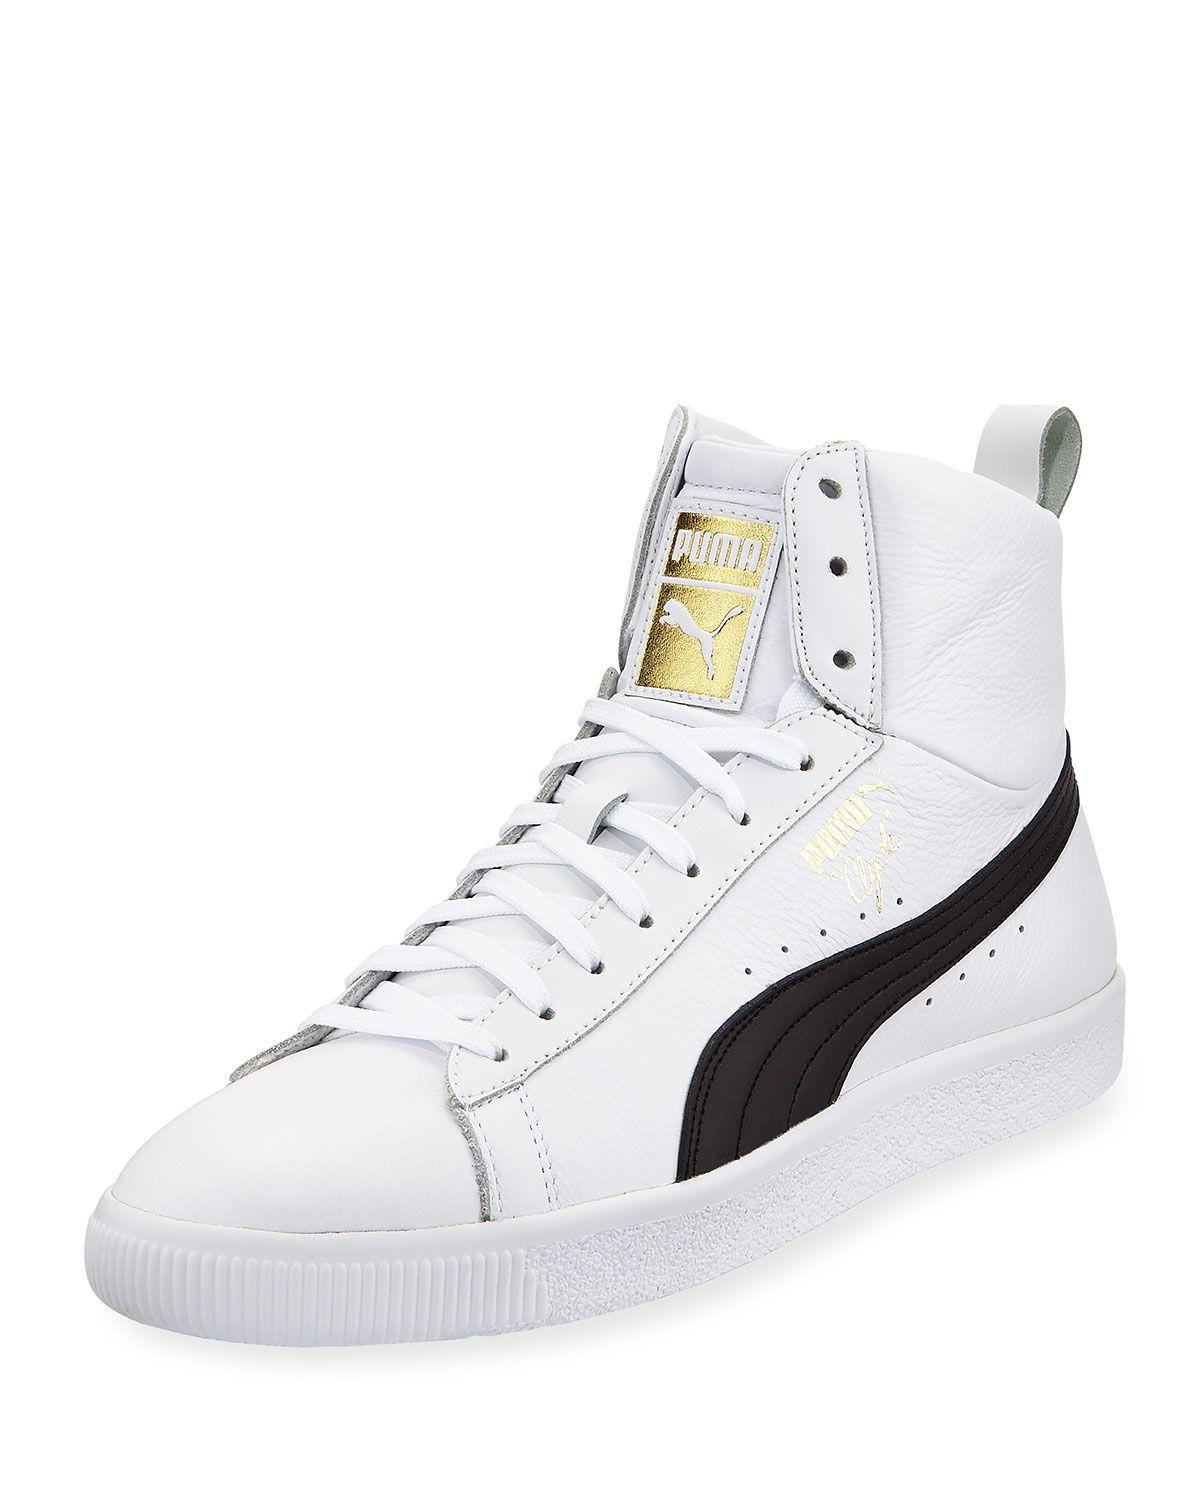 Puma Black and White Logo - Puma Men's Clyde Mid Core High-Top Leather Sneakers, White/Black ...